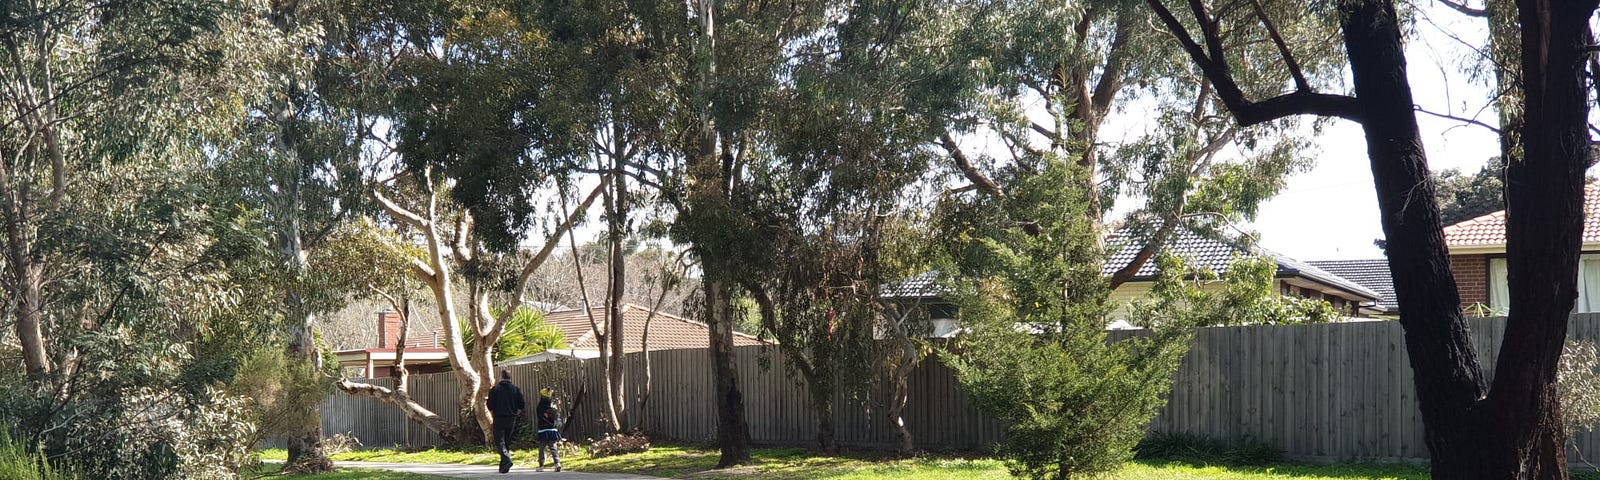 Adult man and young girl walking away from the camera on a footpath through lots of trees and a grassy area. Board privacy fence and houses beyond in the background. No roadmap out of lockdown at the time this photo was taken. Photo by Ann Leach.